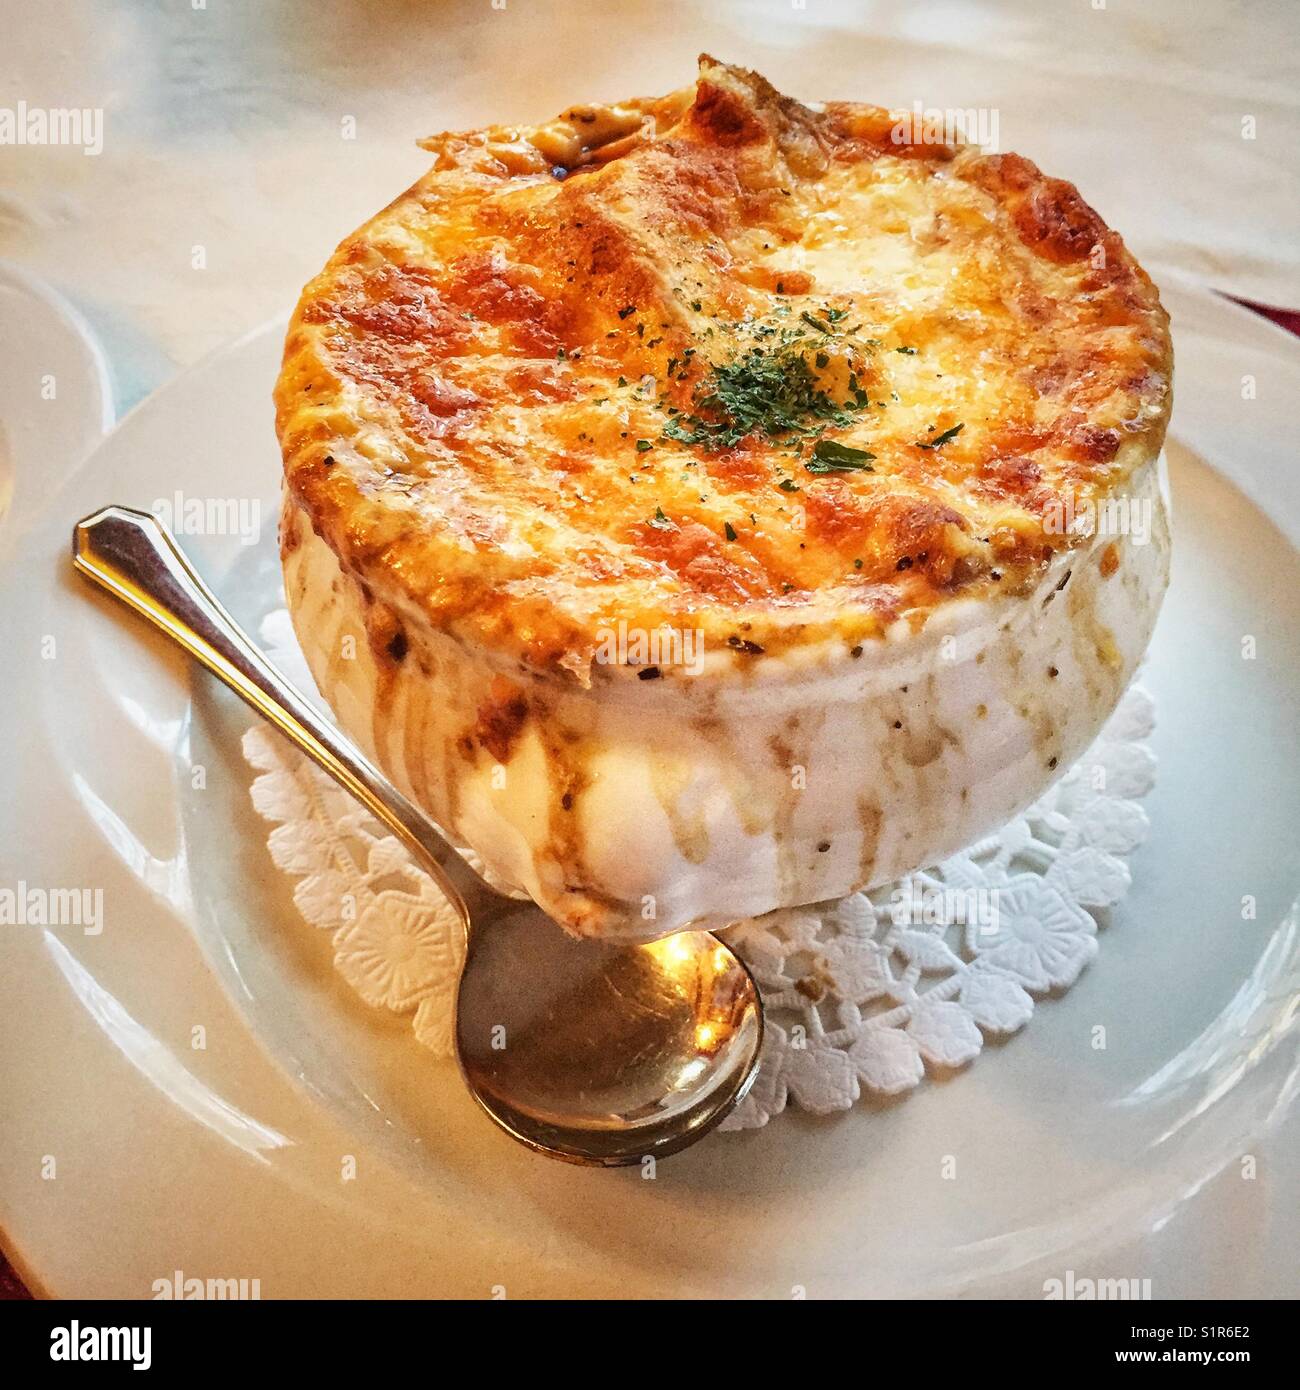 https://c8.alamy.com/comp/S1R6E2/french-onion-soup-with-lots-of-cheese-S1R6E2.jpg